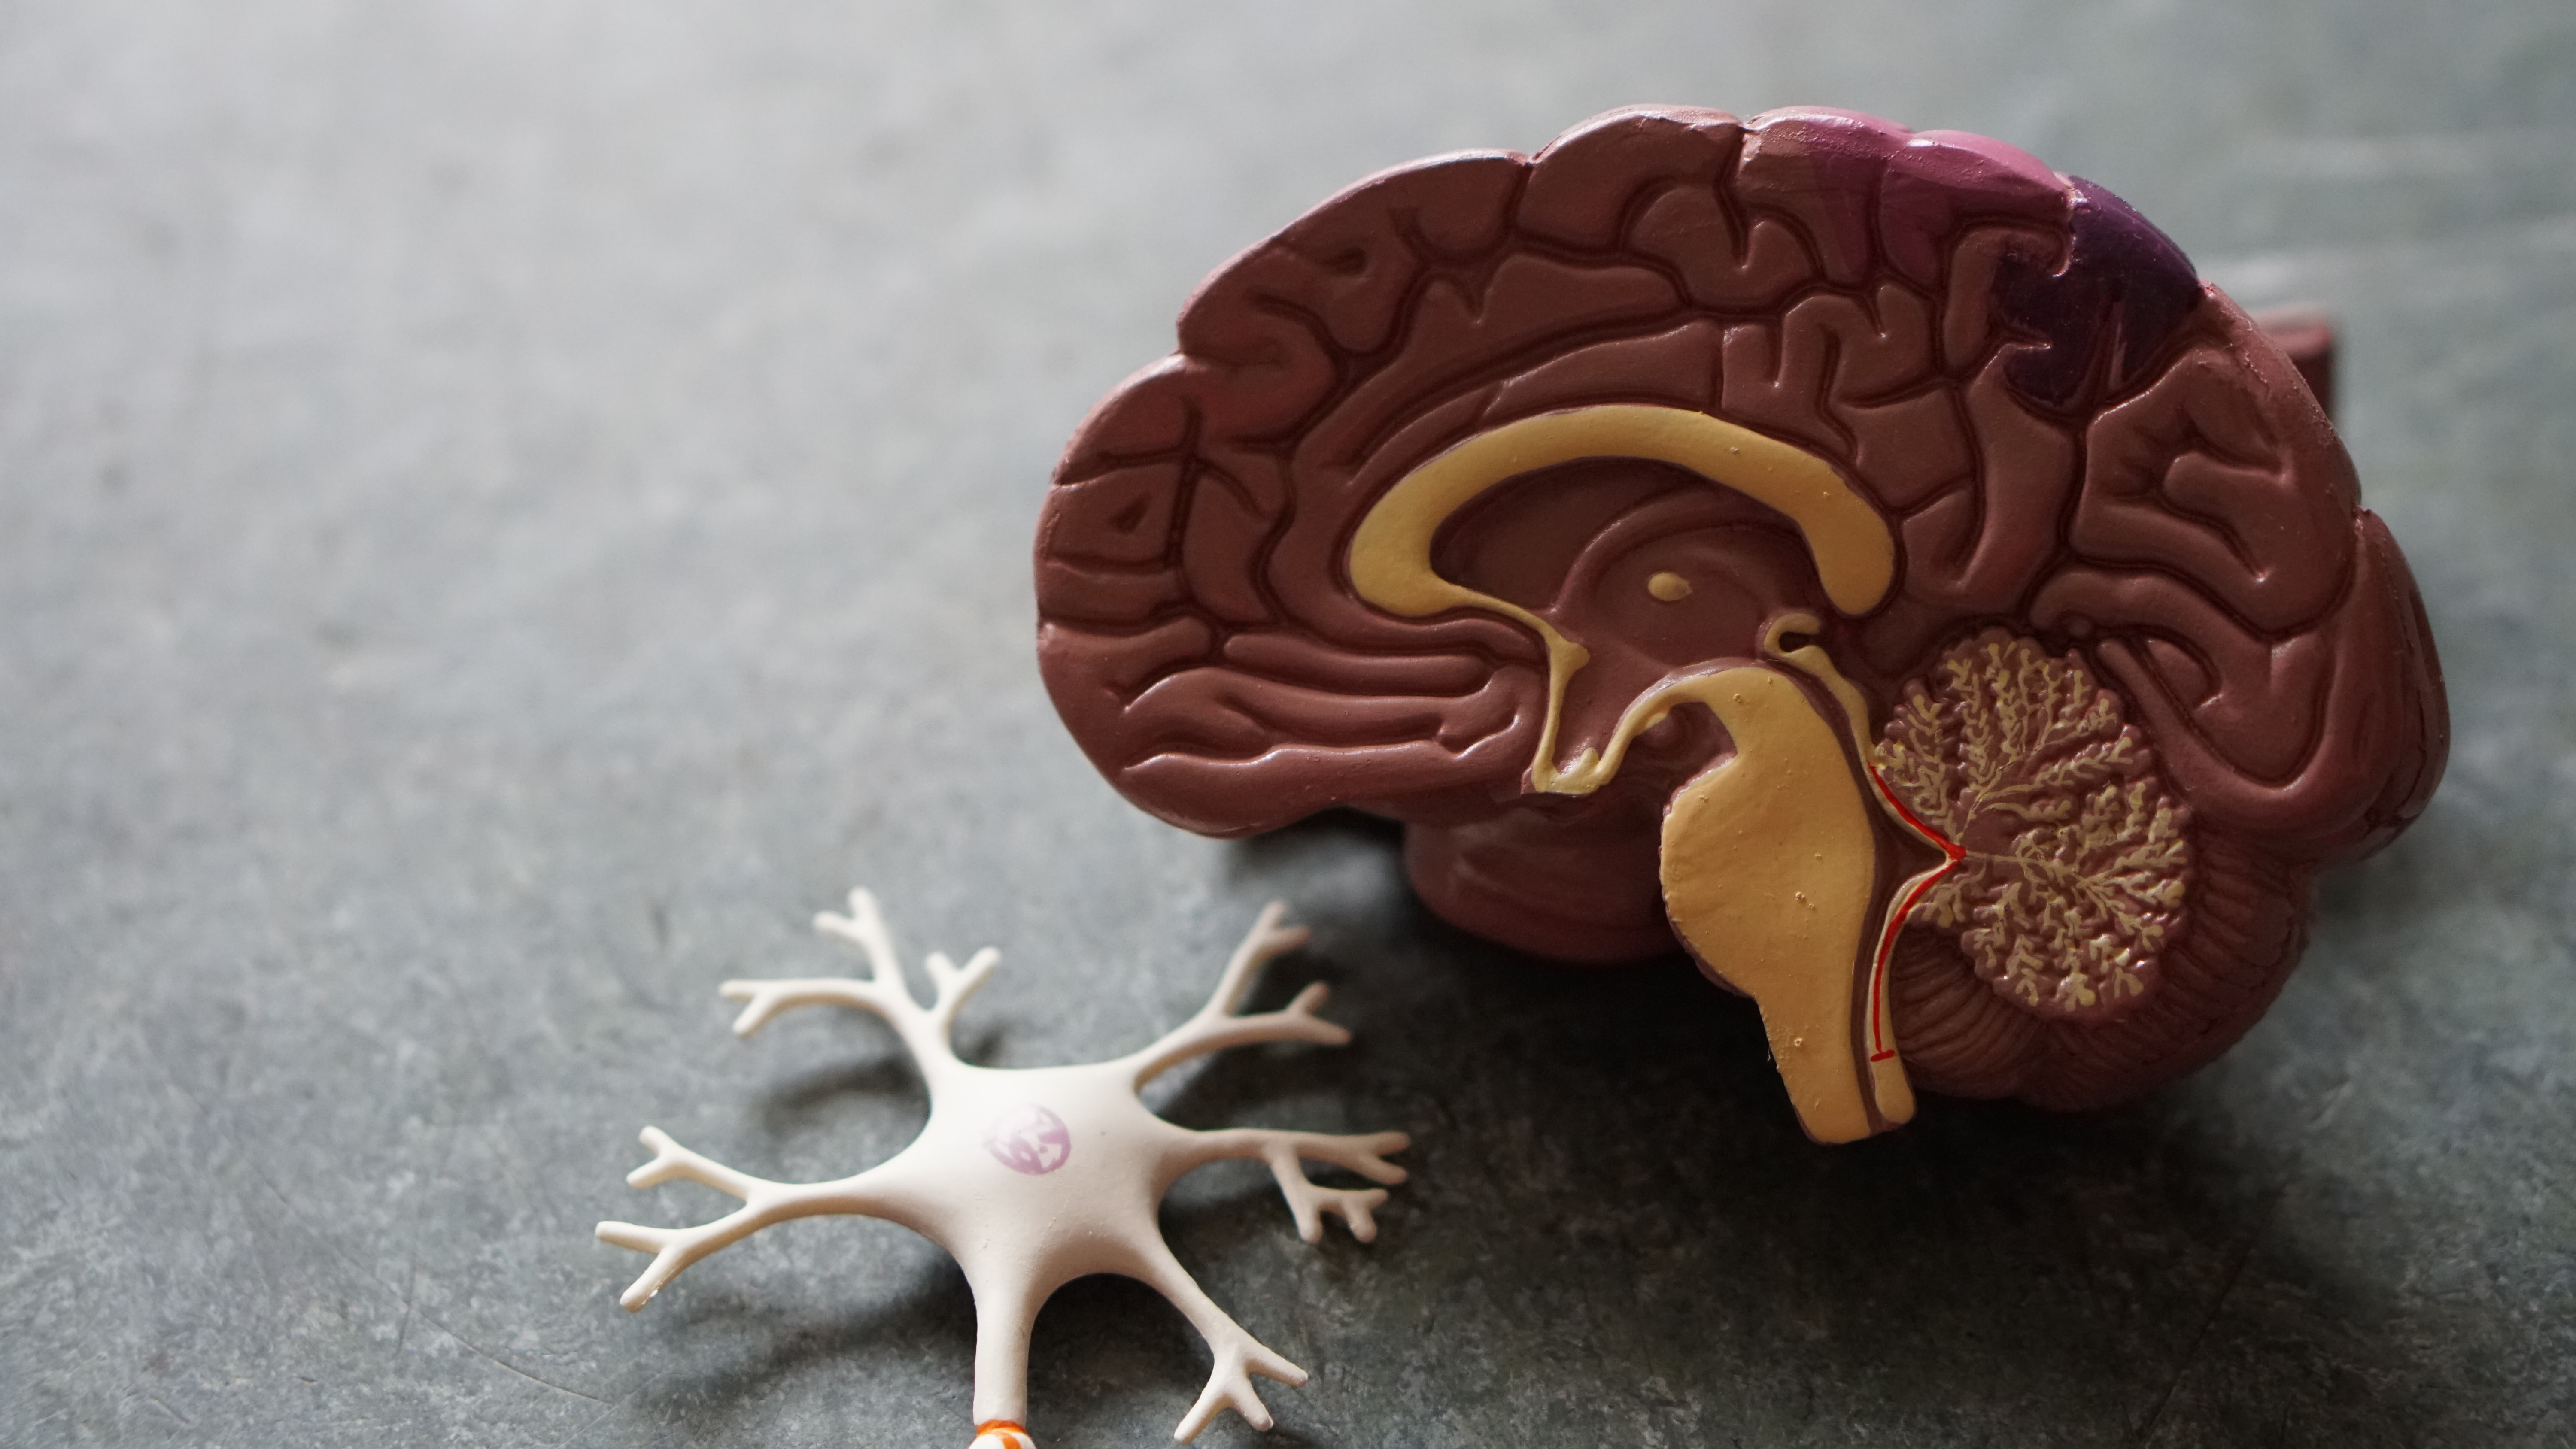 Toy replica of human brain and single neuron